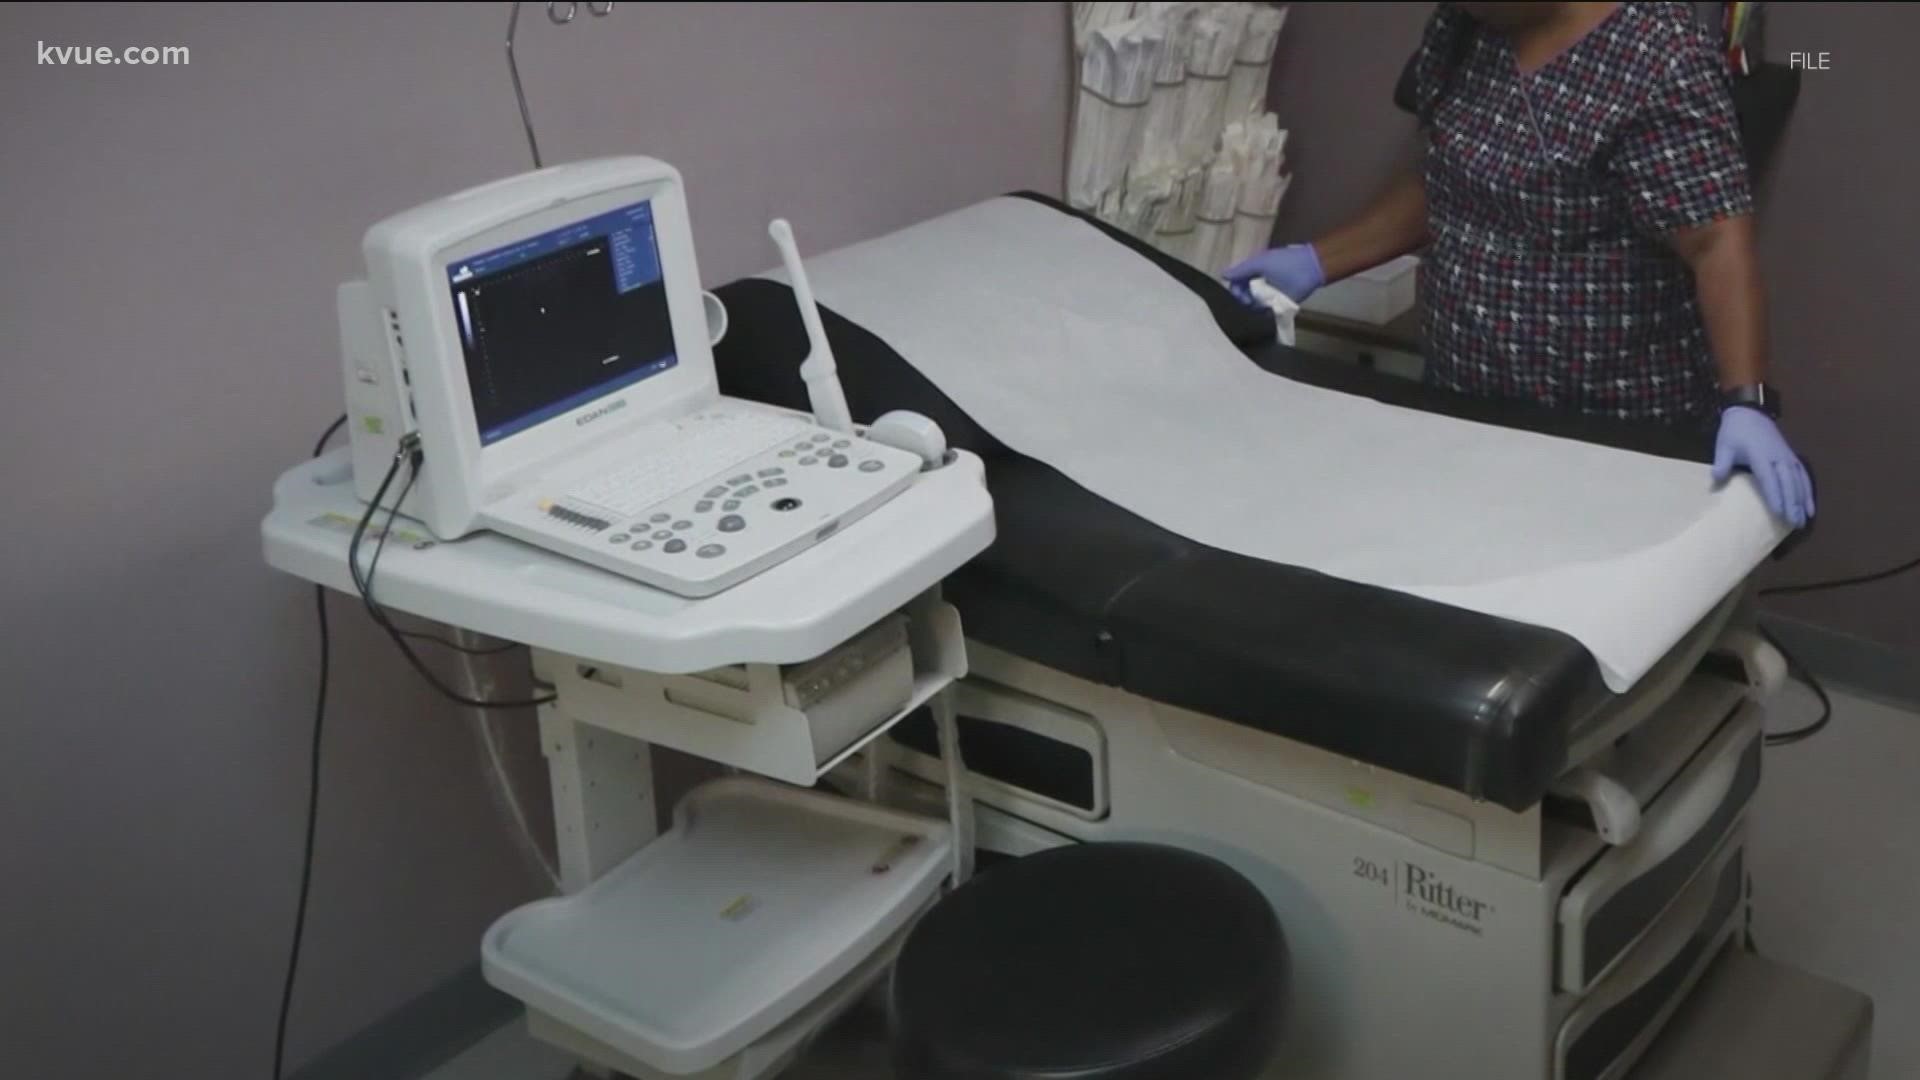 The new statewide abortion law has faced many legal challenges and has been widely debated. But one viewer reached out to us about some of the medical terminologies.